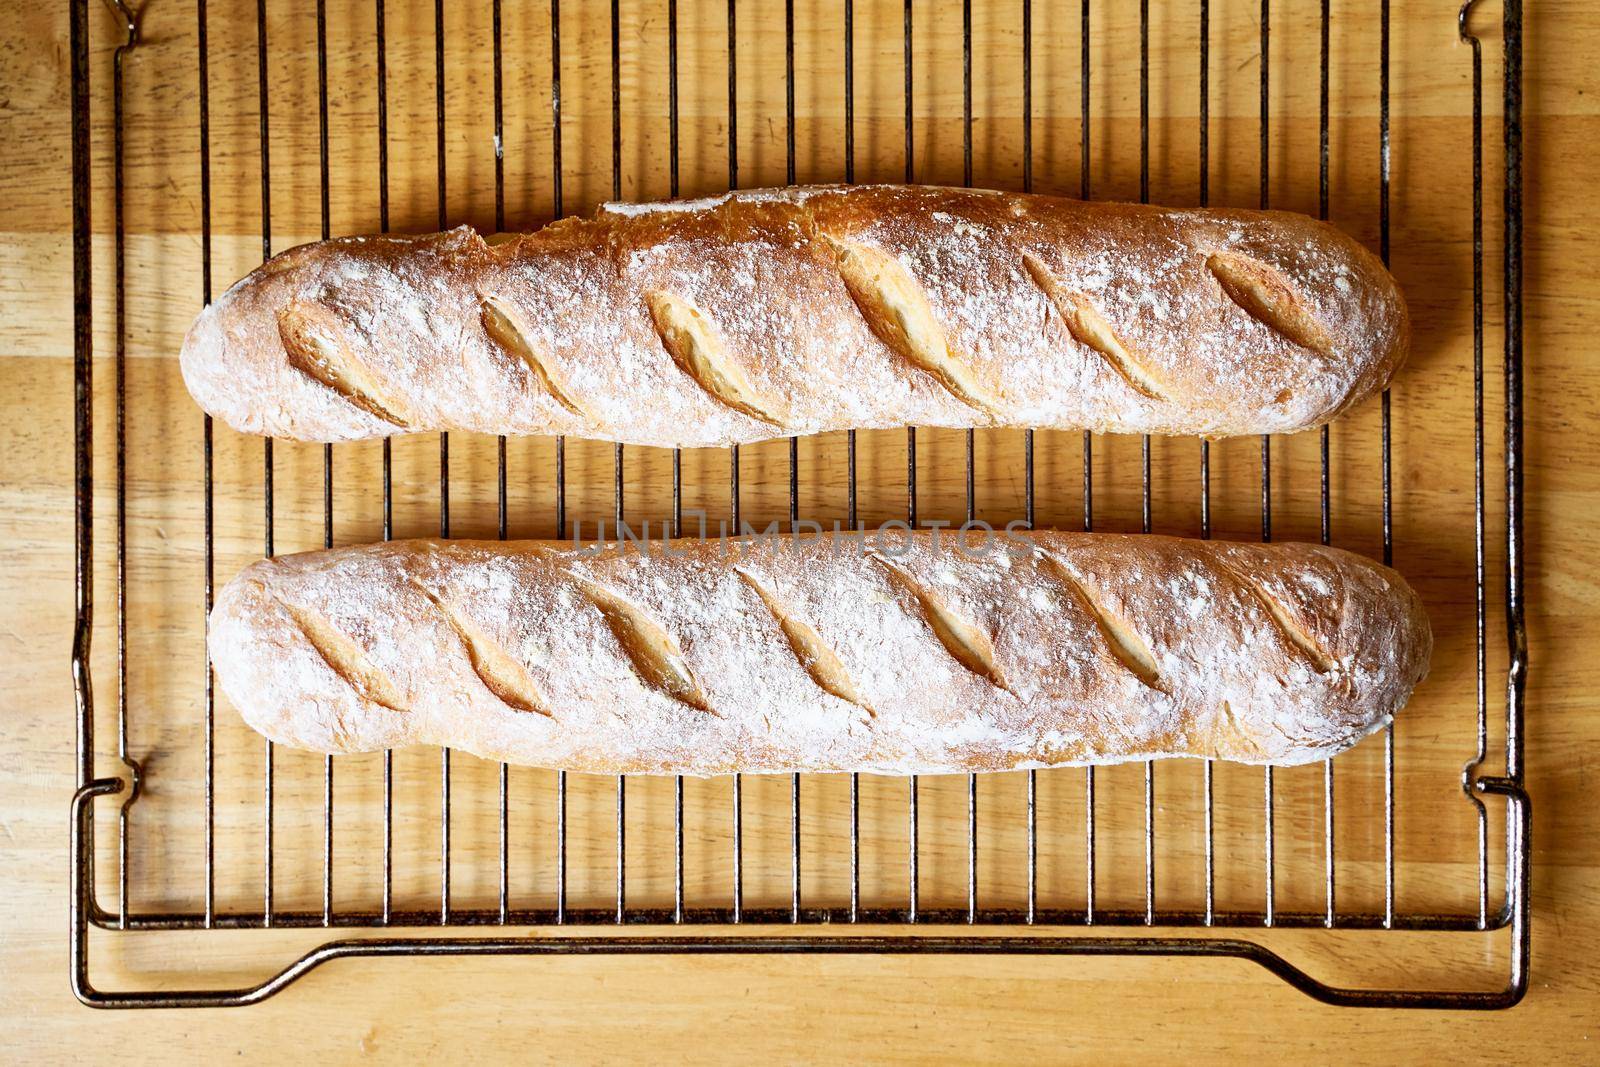 Fresh baked homemade crusty bread baguette. Two loaves cool on metal grate by NataBene